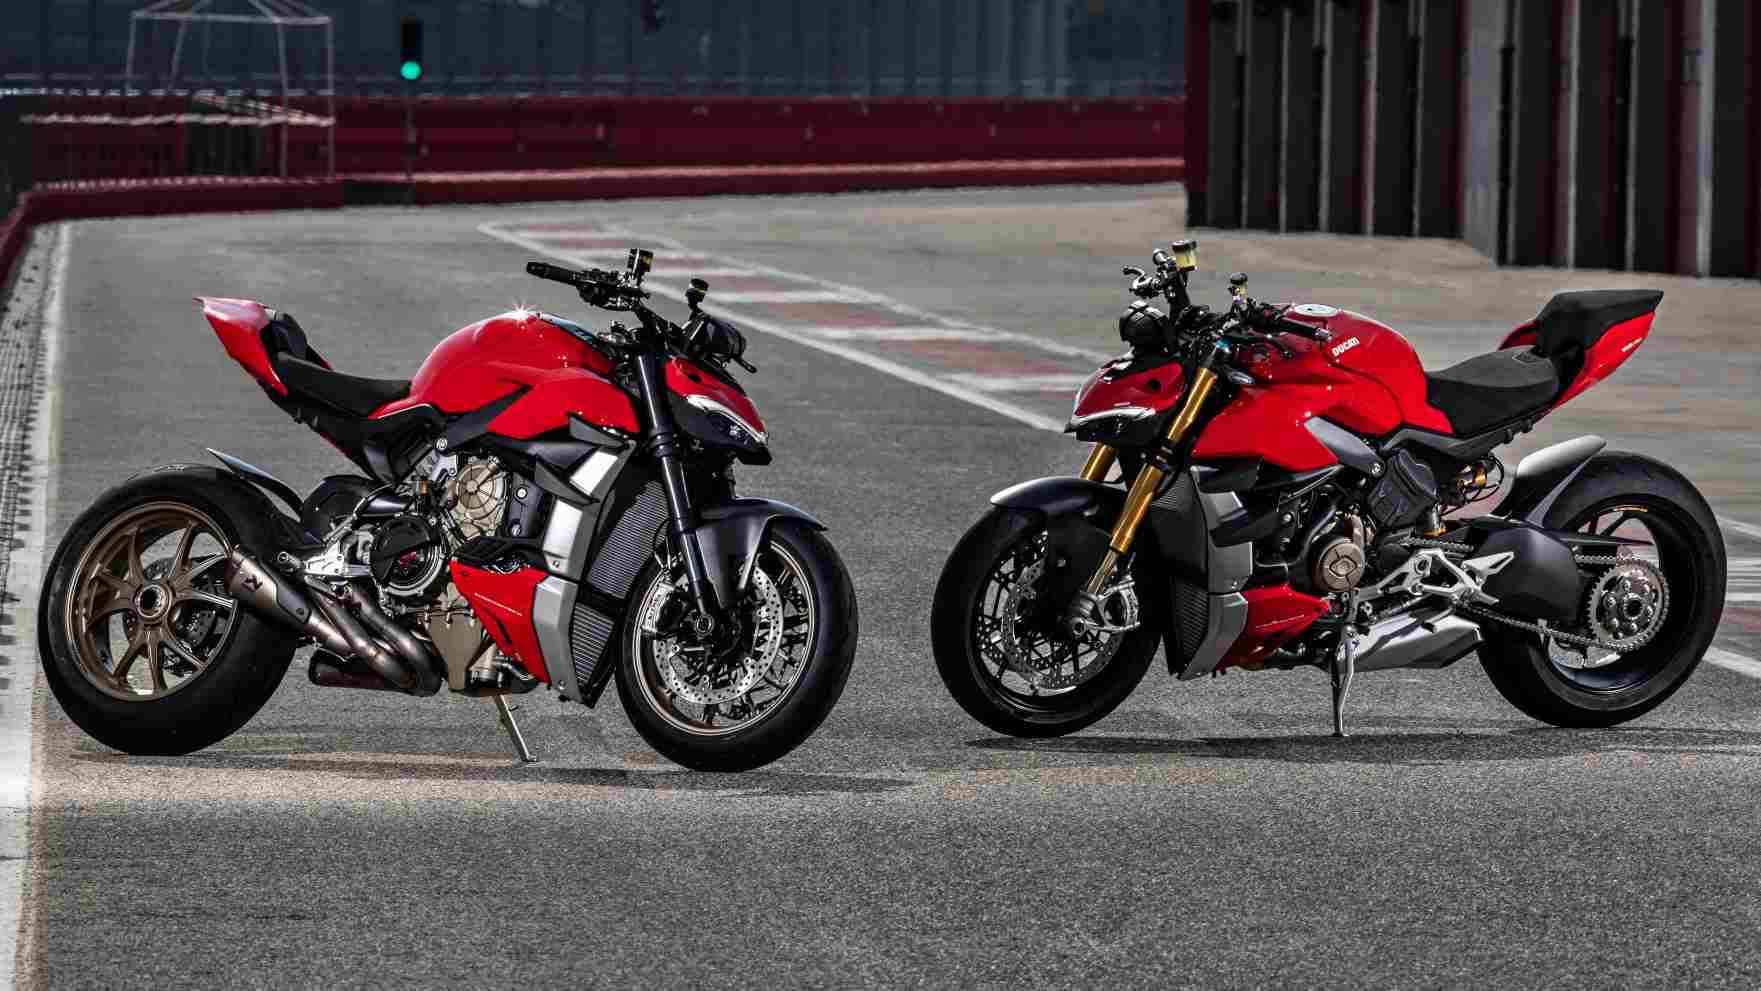 Deliveries of the Ducati Streetfighter V4 will commence in India once region-wise lockdowns are lifted. Image: Ducati